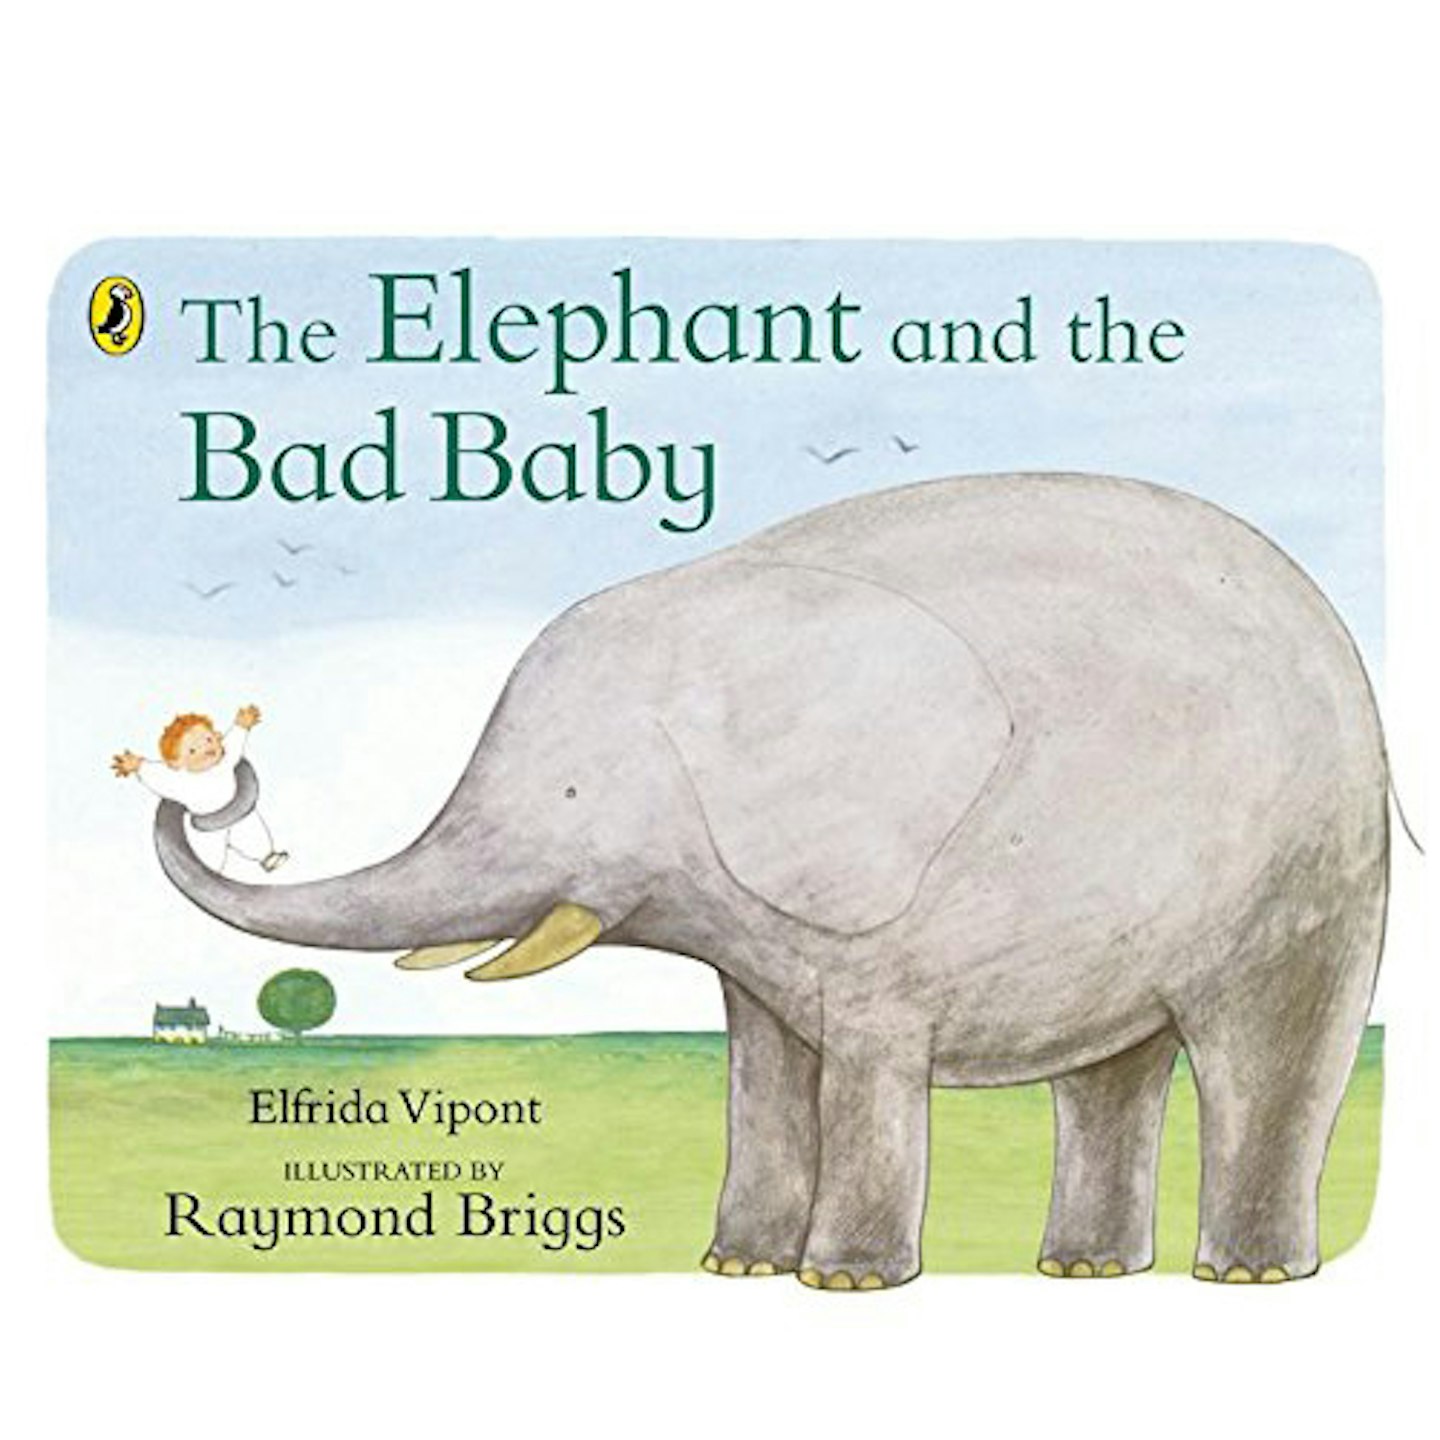 The Elephant and the Bad Baby by Elfrida Vipont  and Raymond Briggs